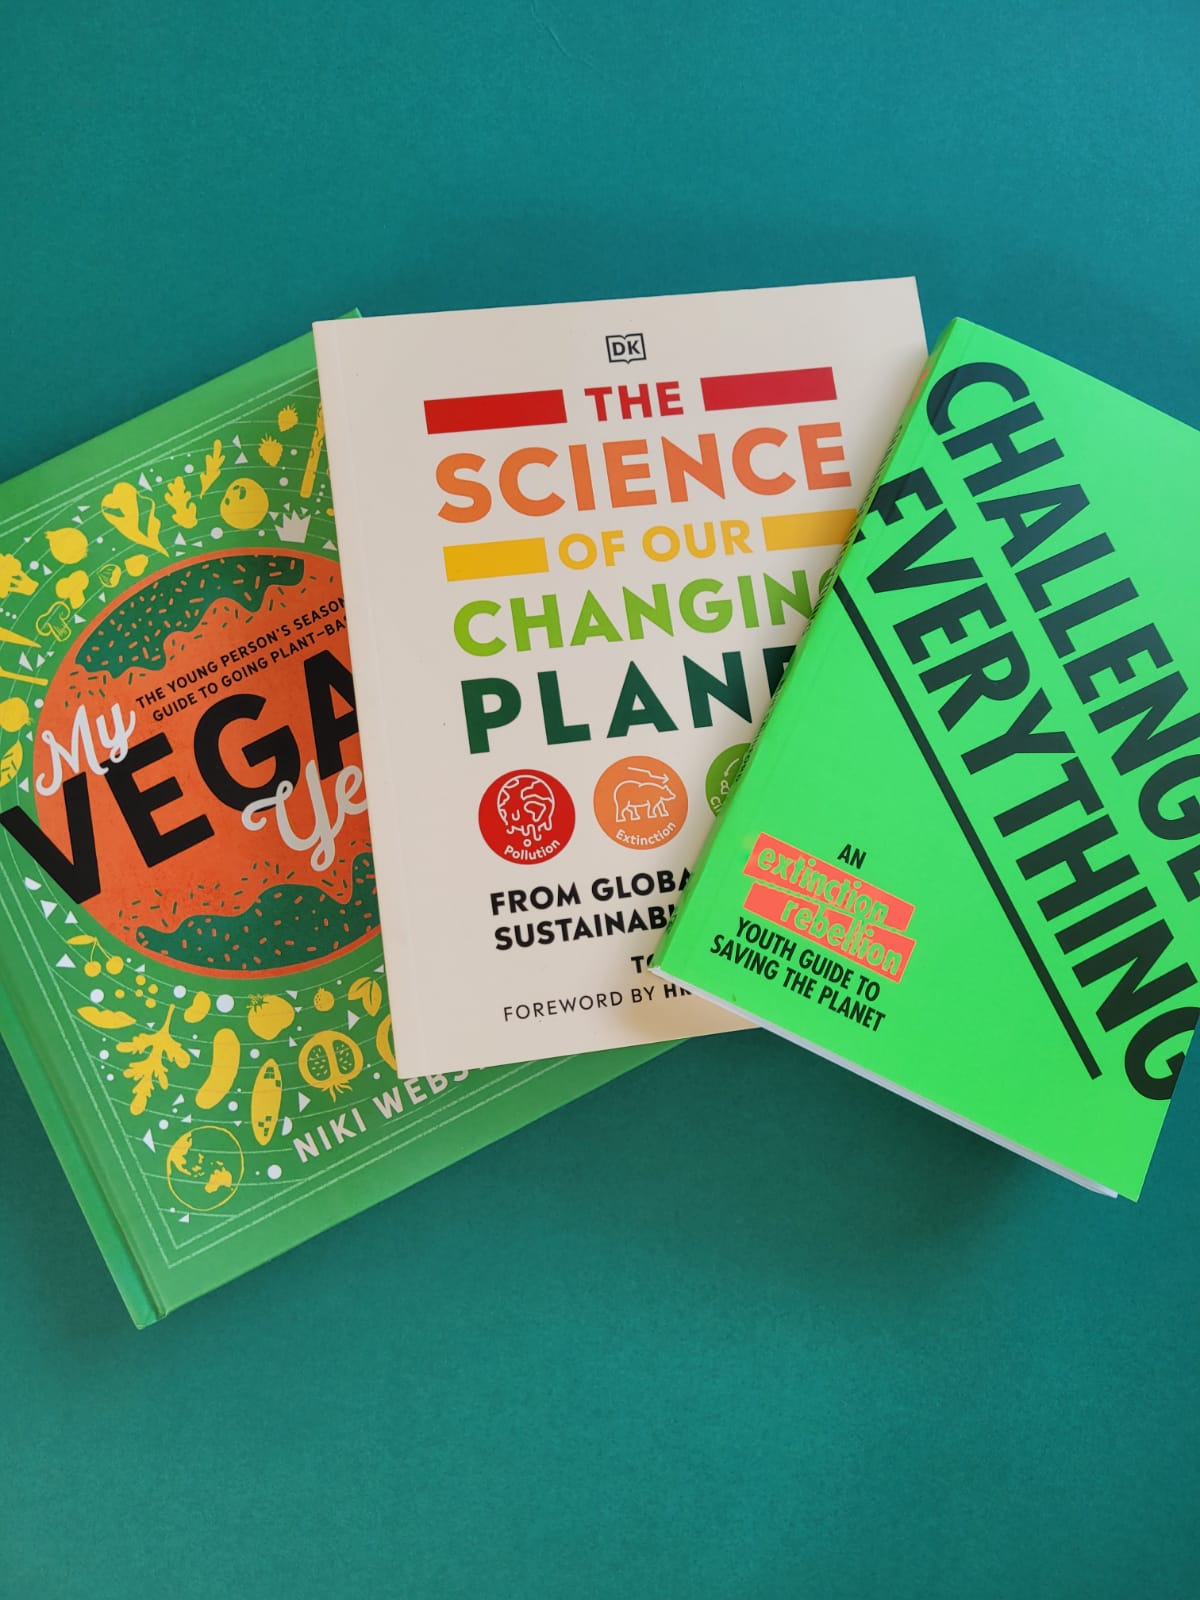 15-18 years 'Cooking Up a Campaign' Gift Wrapped Eco-Book Bundle